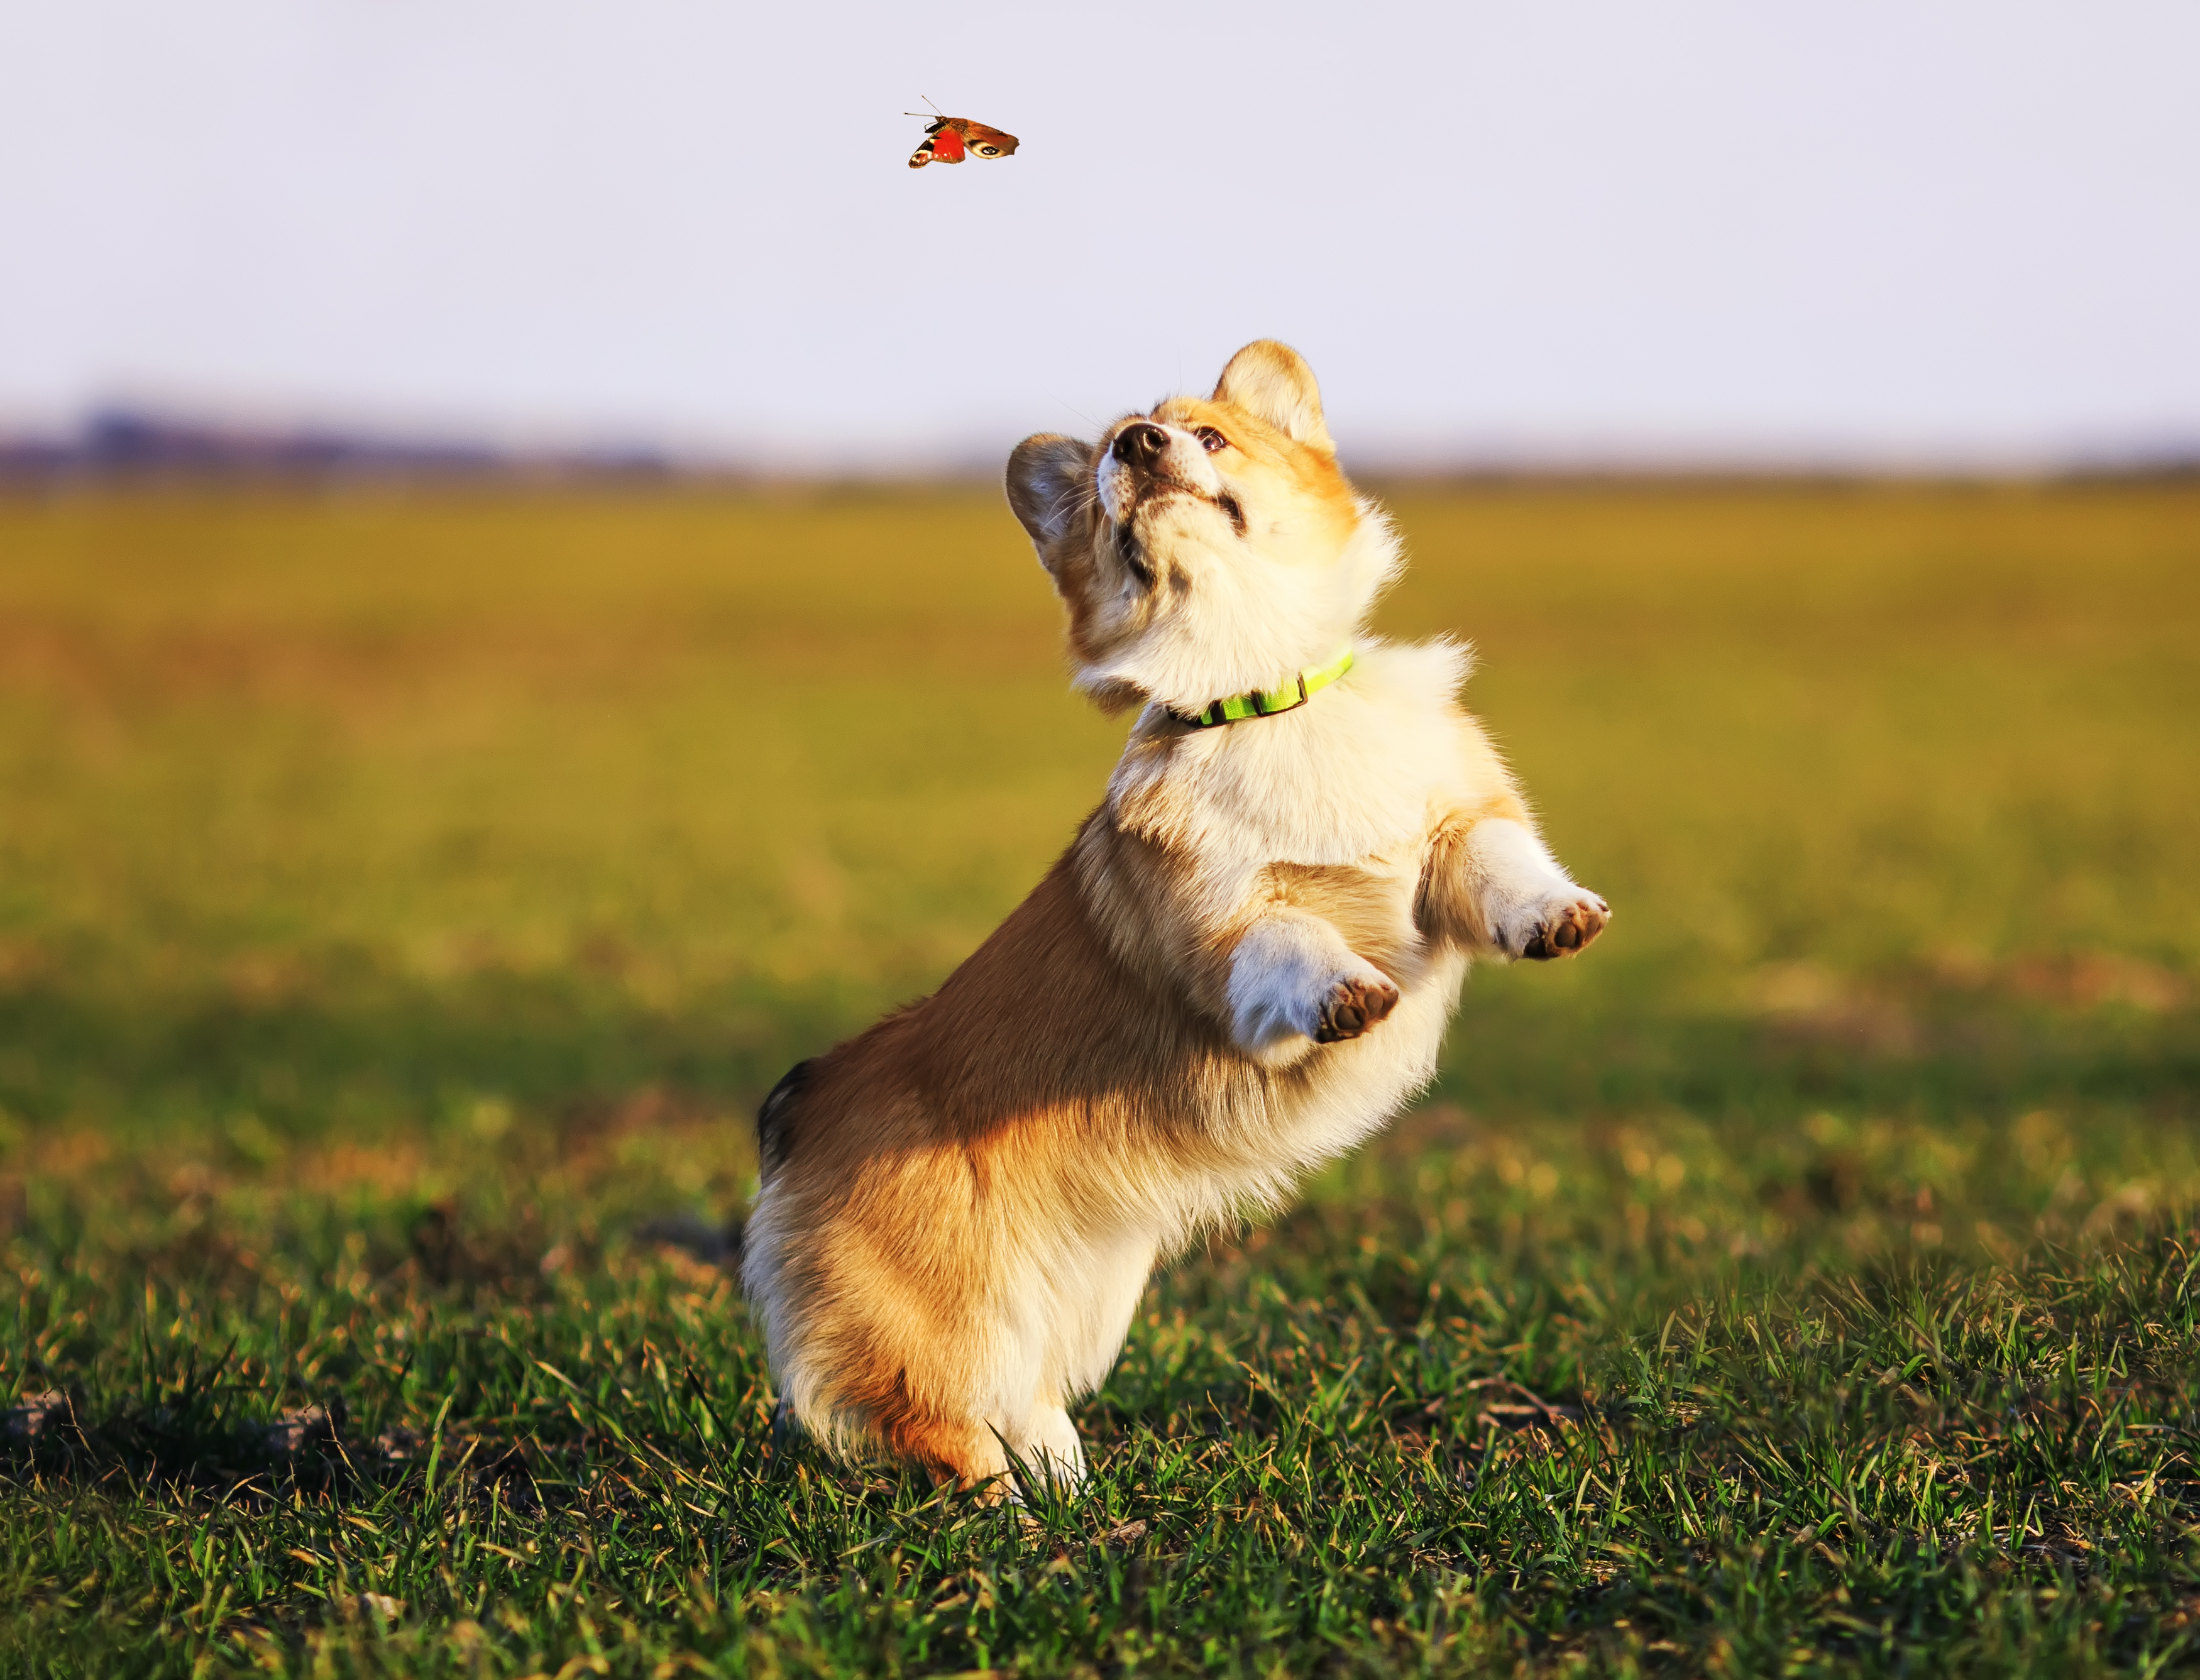 Distracted Pembroke Welsh Corgi puppy chasing butterfly